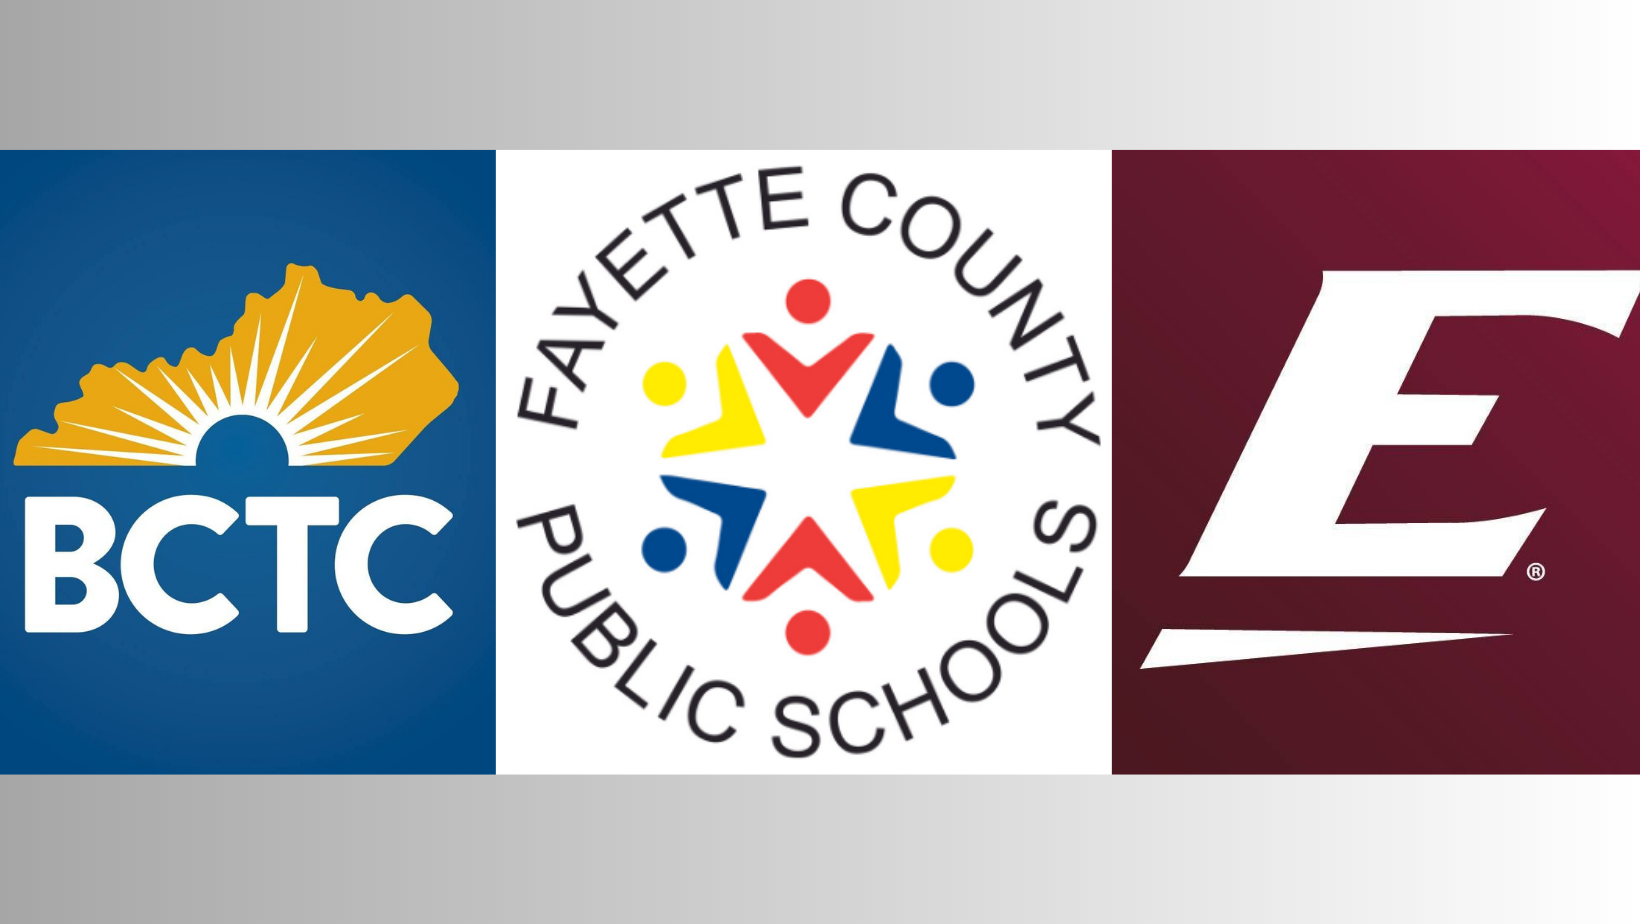 Dual credit options for FCPS students expanded with BCTC, EKU